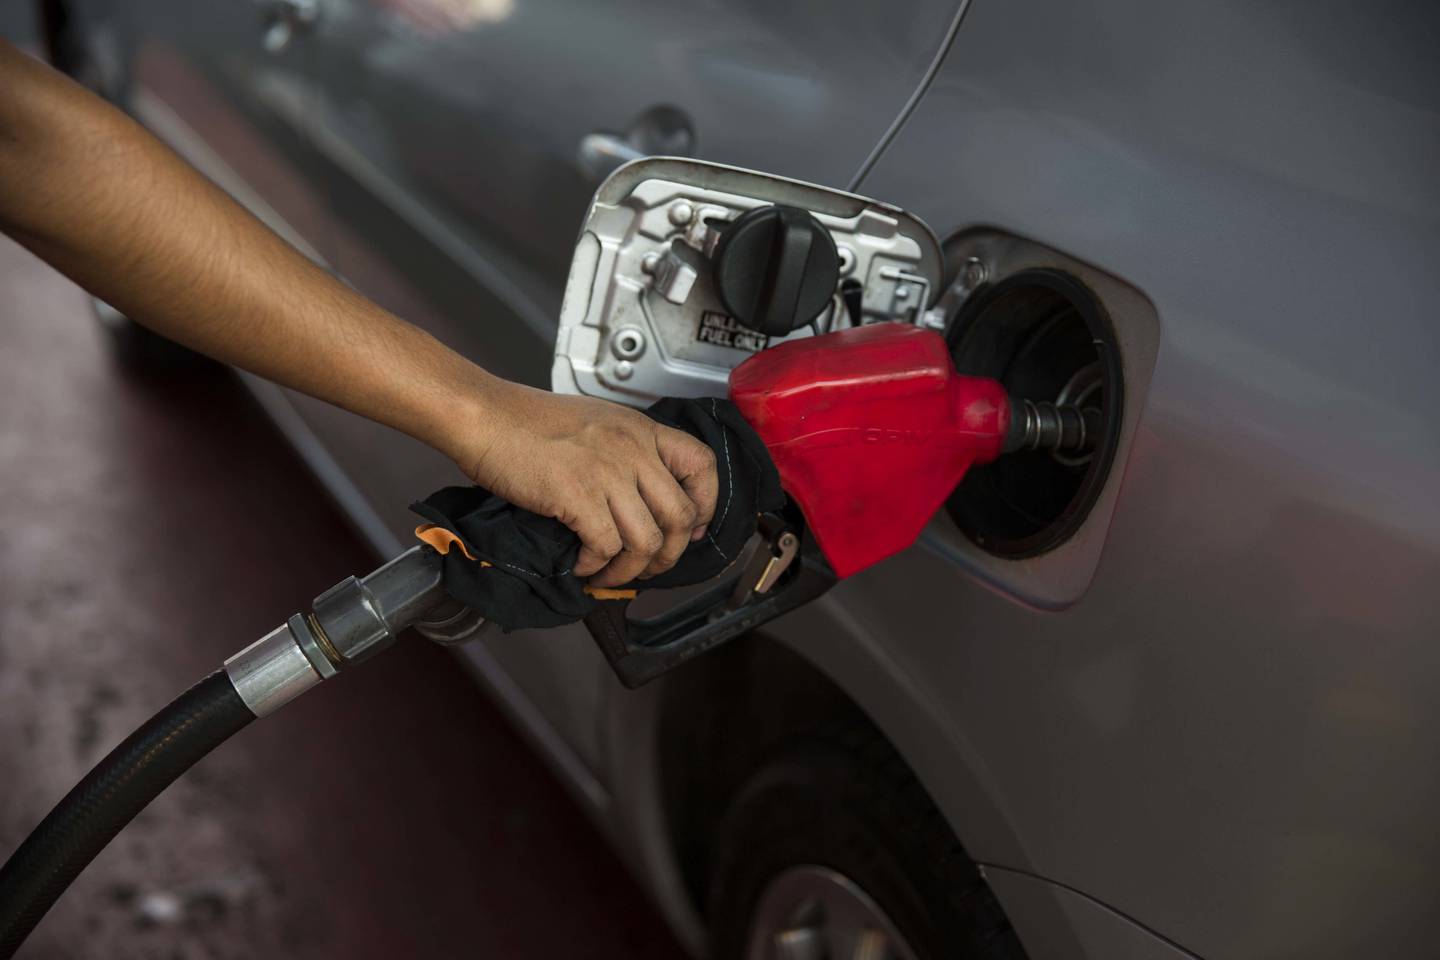 The prices of oil and gasoline have a direct relationship, according to industry sources.